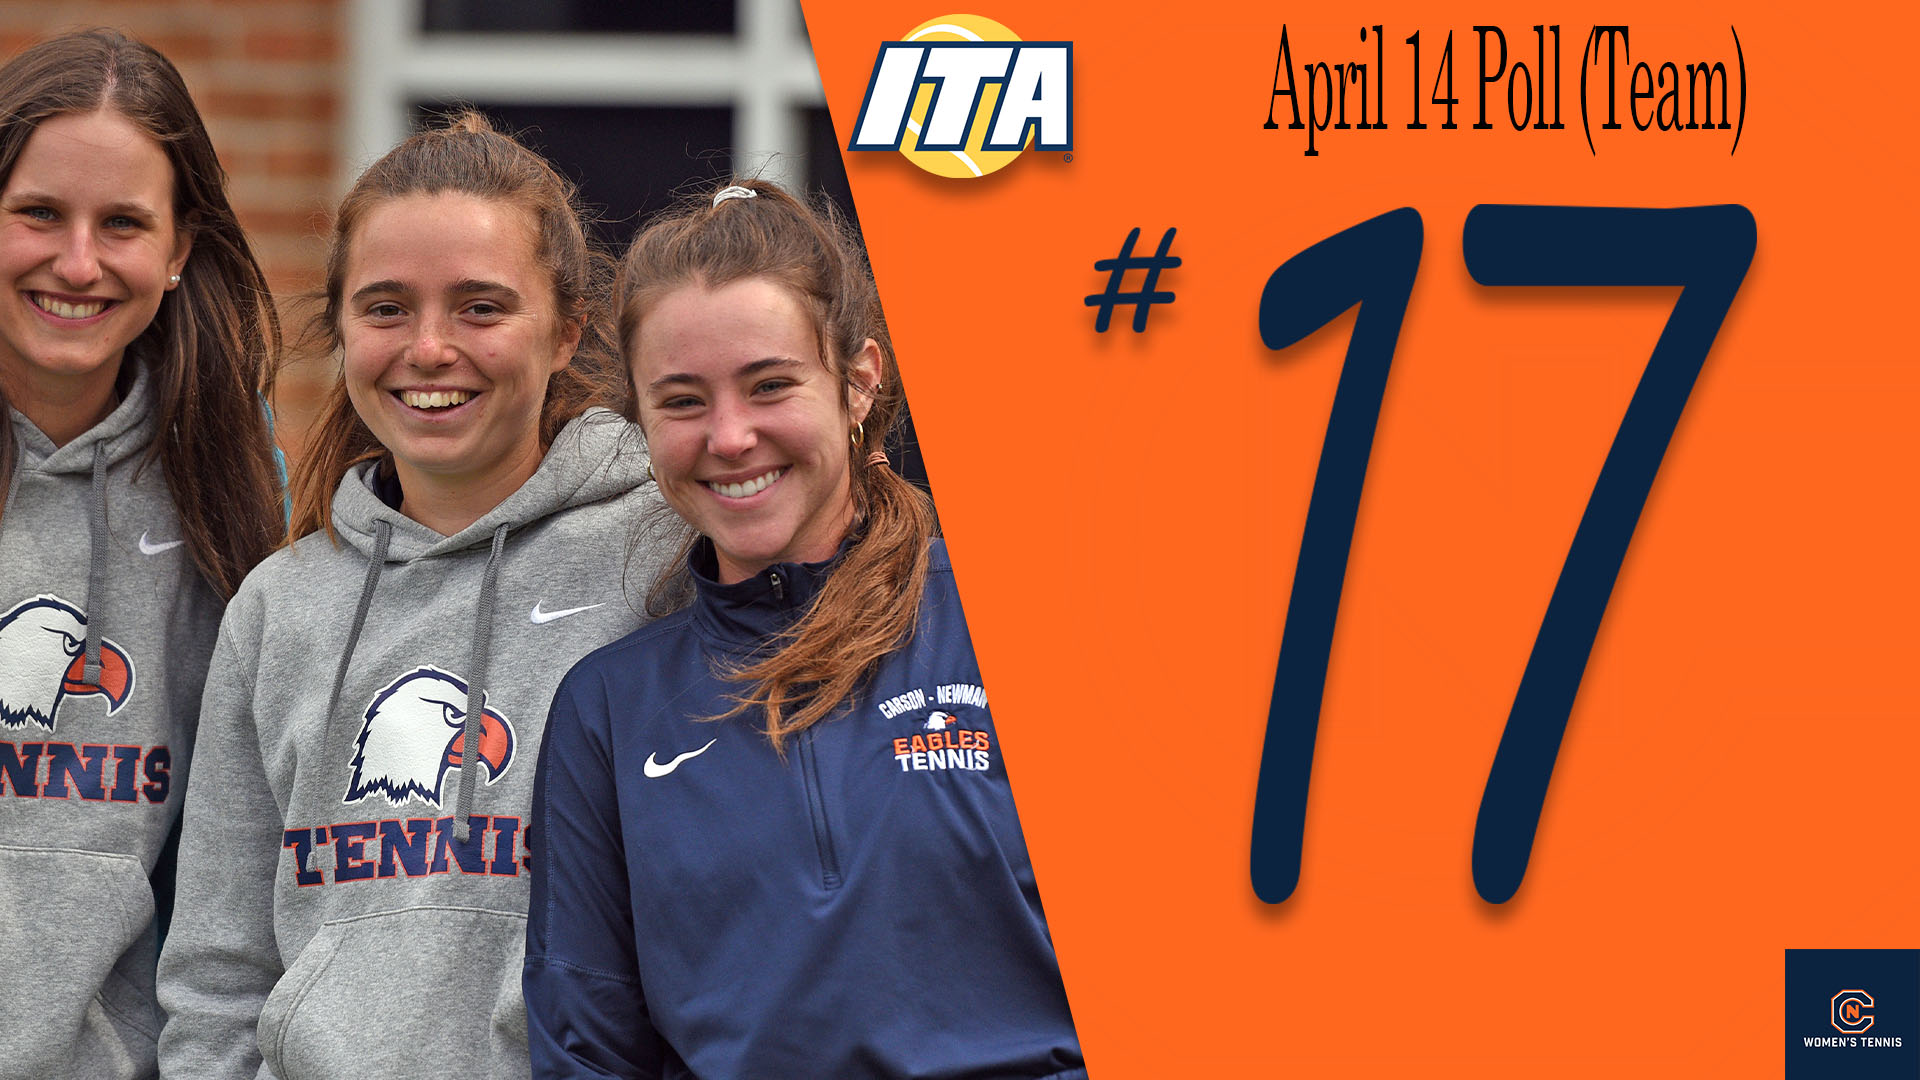 Eagles soar within ITA top 20